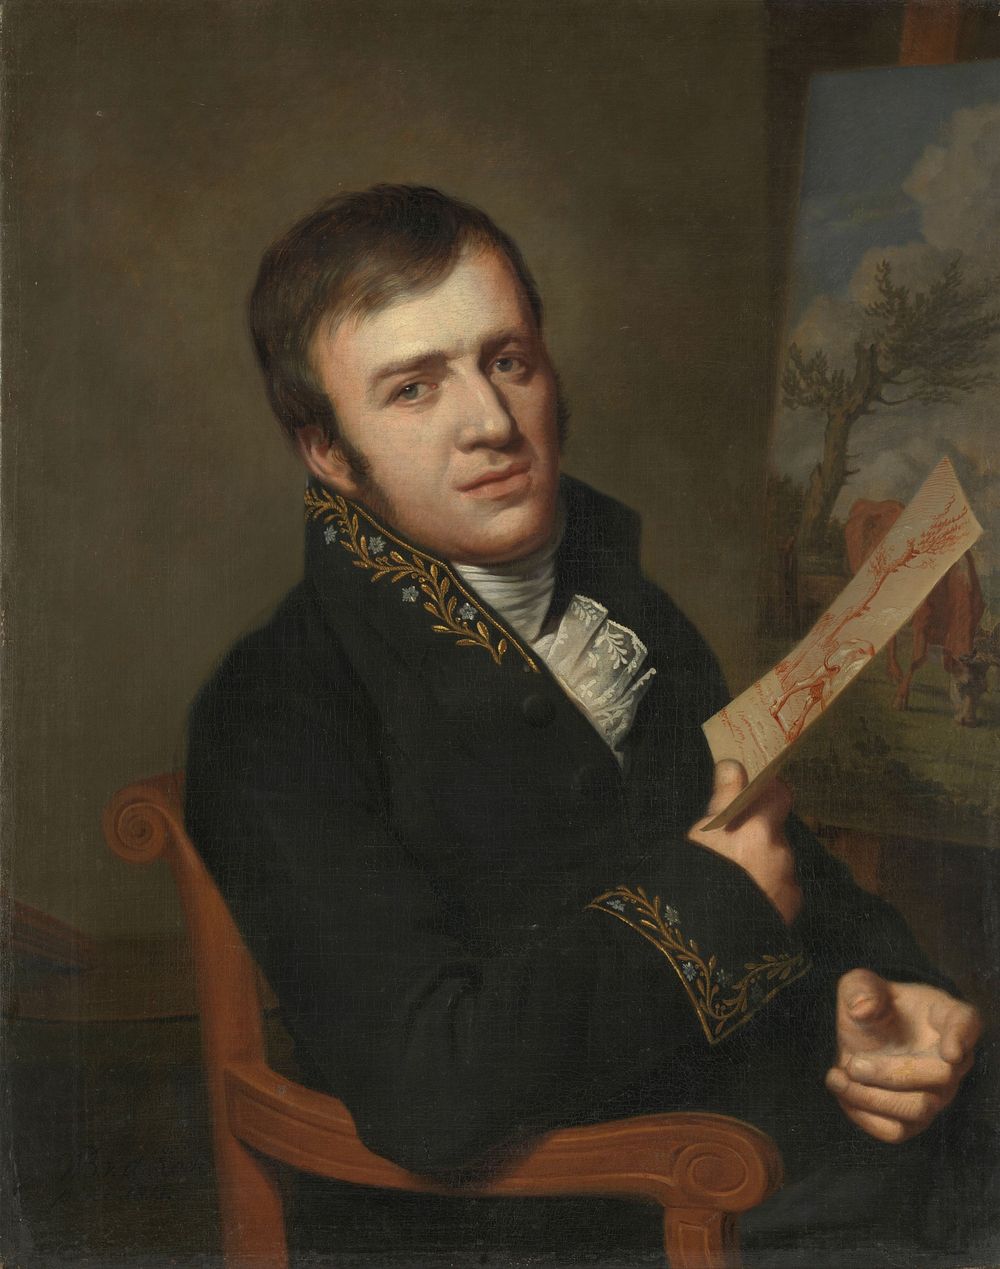 Jan (Baptist) Kobell II (1778-1814), Painter, in the Uniform of a Member of the Royal Institute of Science, Literature and…